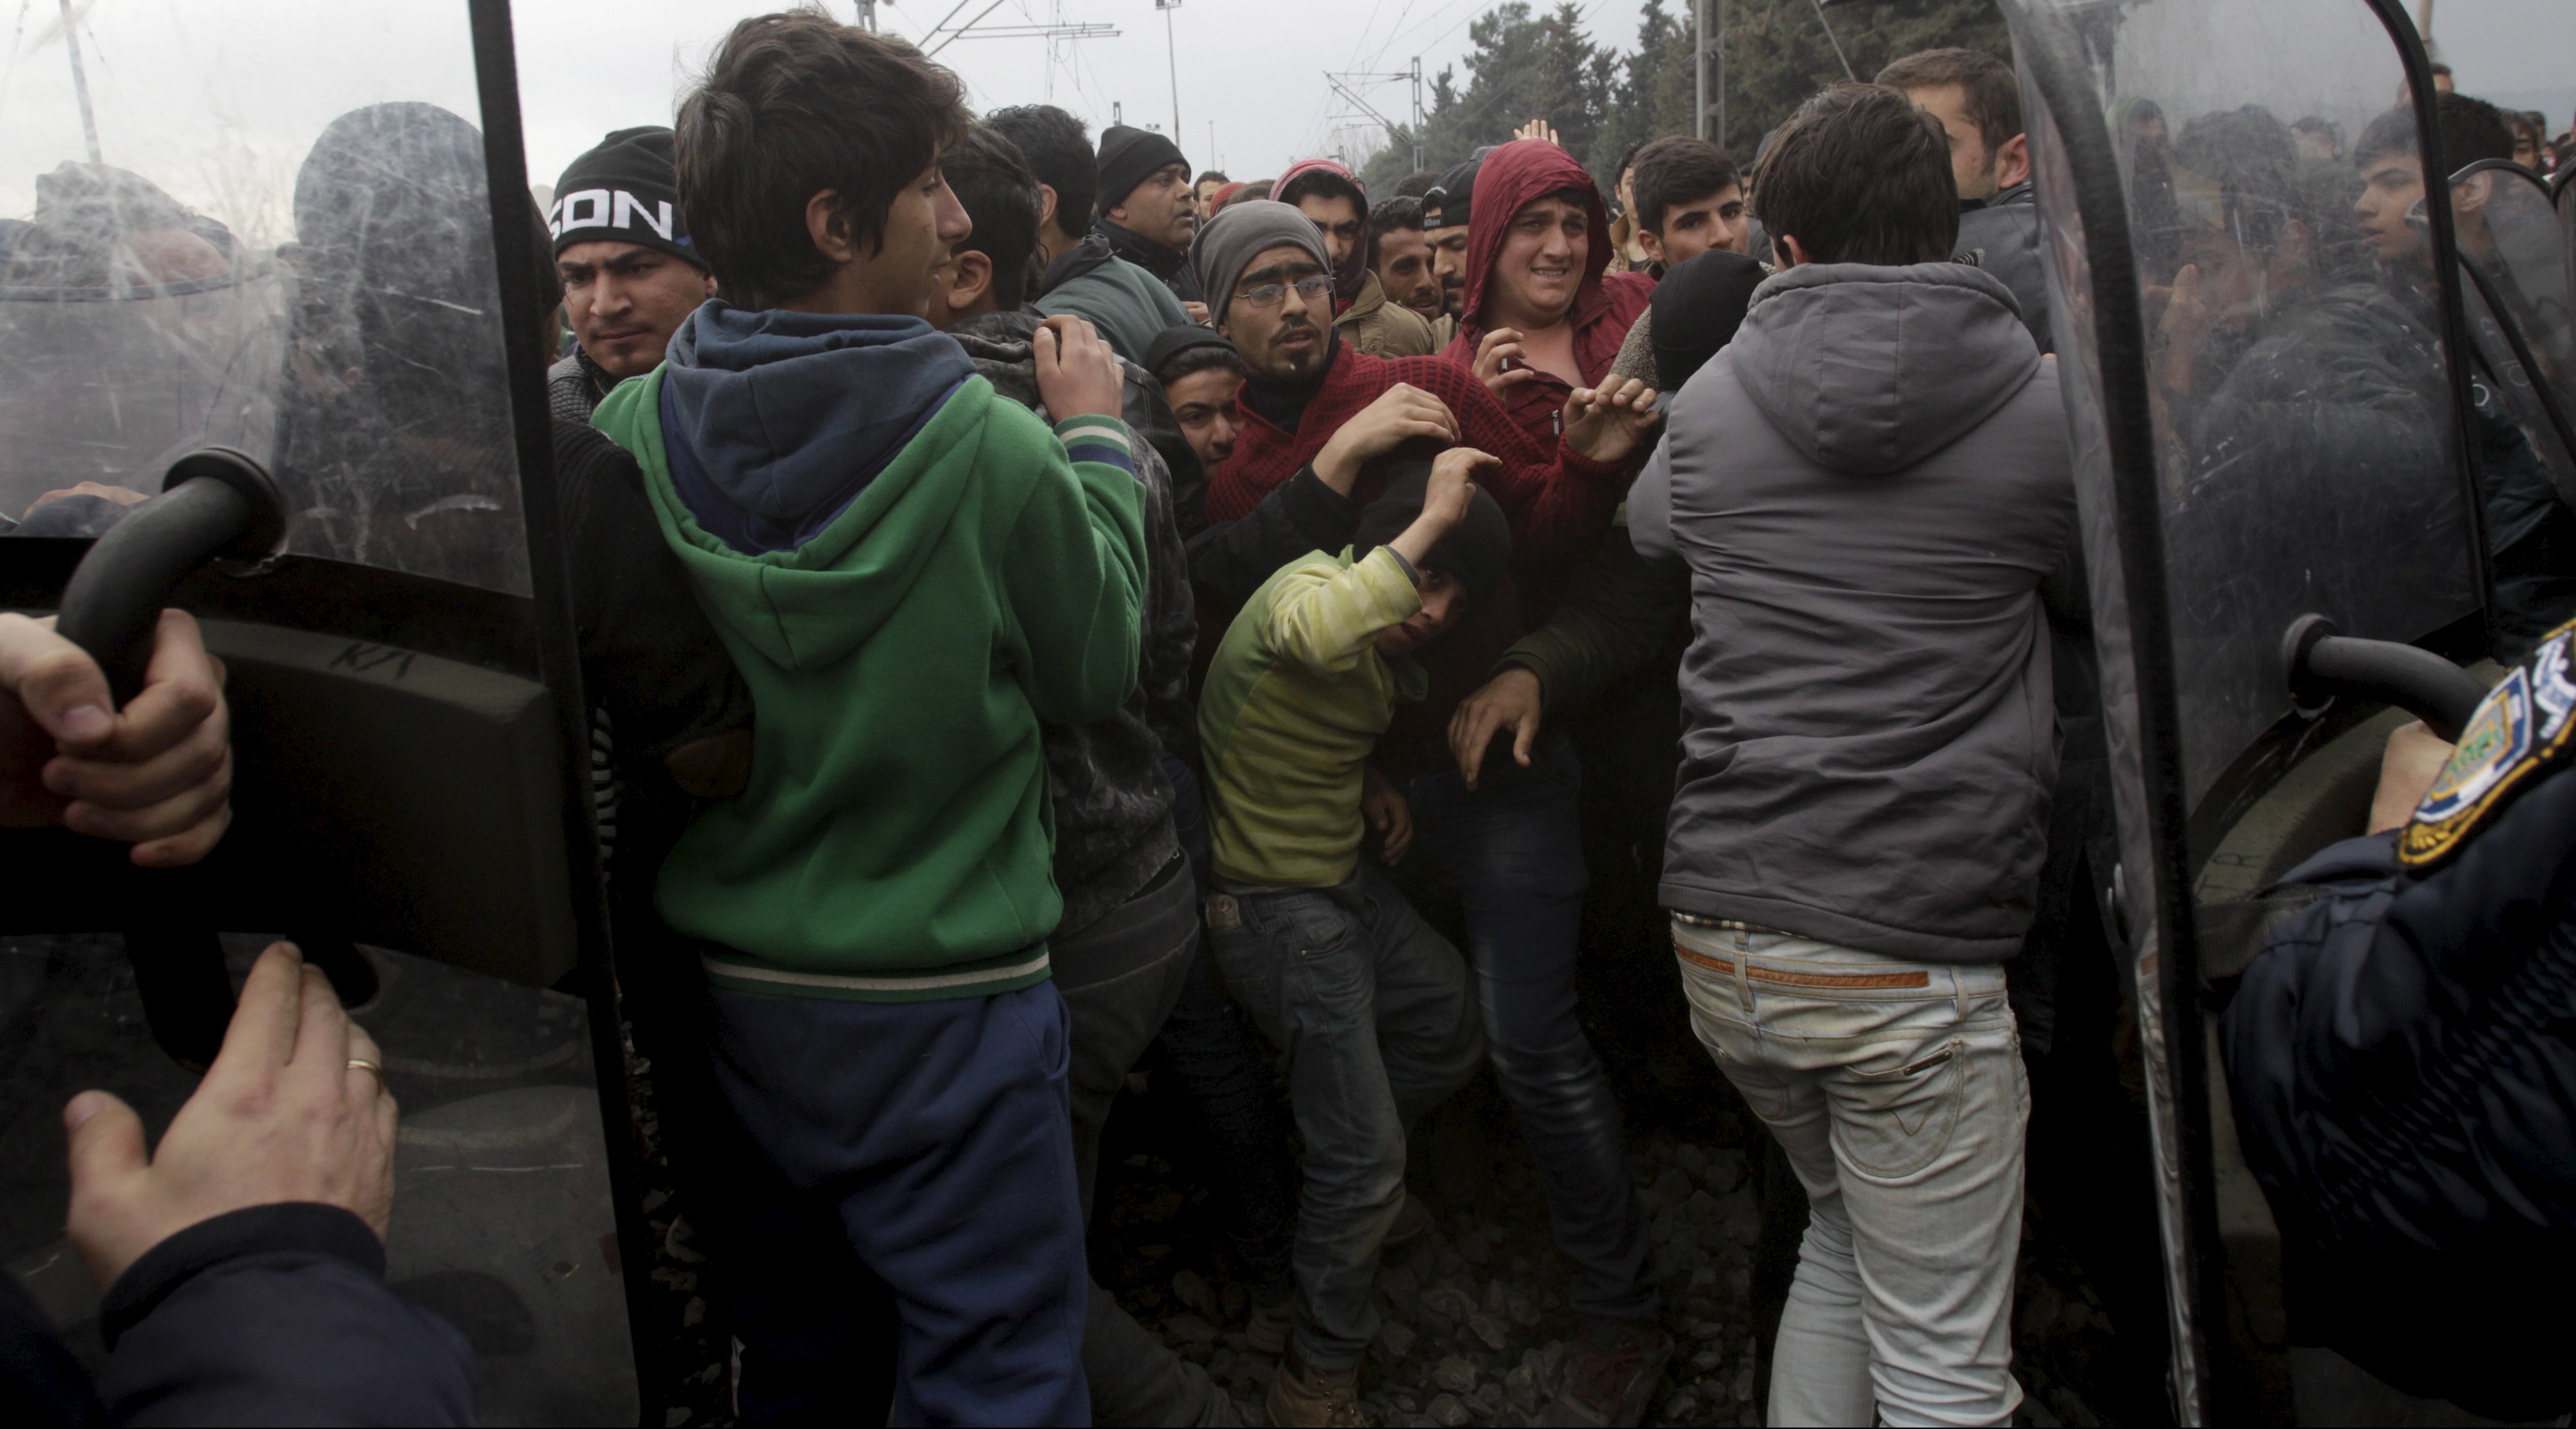 Stranded refugees and migrants are pushed back by Greek riot police after they tried to storm Macedonia from the Greek side of the border during a protest, near the Greek village of Idomeni, February 29, 2016. Macedonian police fired tear gas to disperse hundreds of migrants and refugees who stormed the border from Greece on Monday, tearing down a gate as frustrations boiled over at restrictions imposed on people moving through the Balkans. REUTERS/Alexandros Avramidis - RTS8KG4